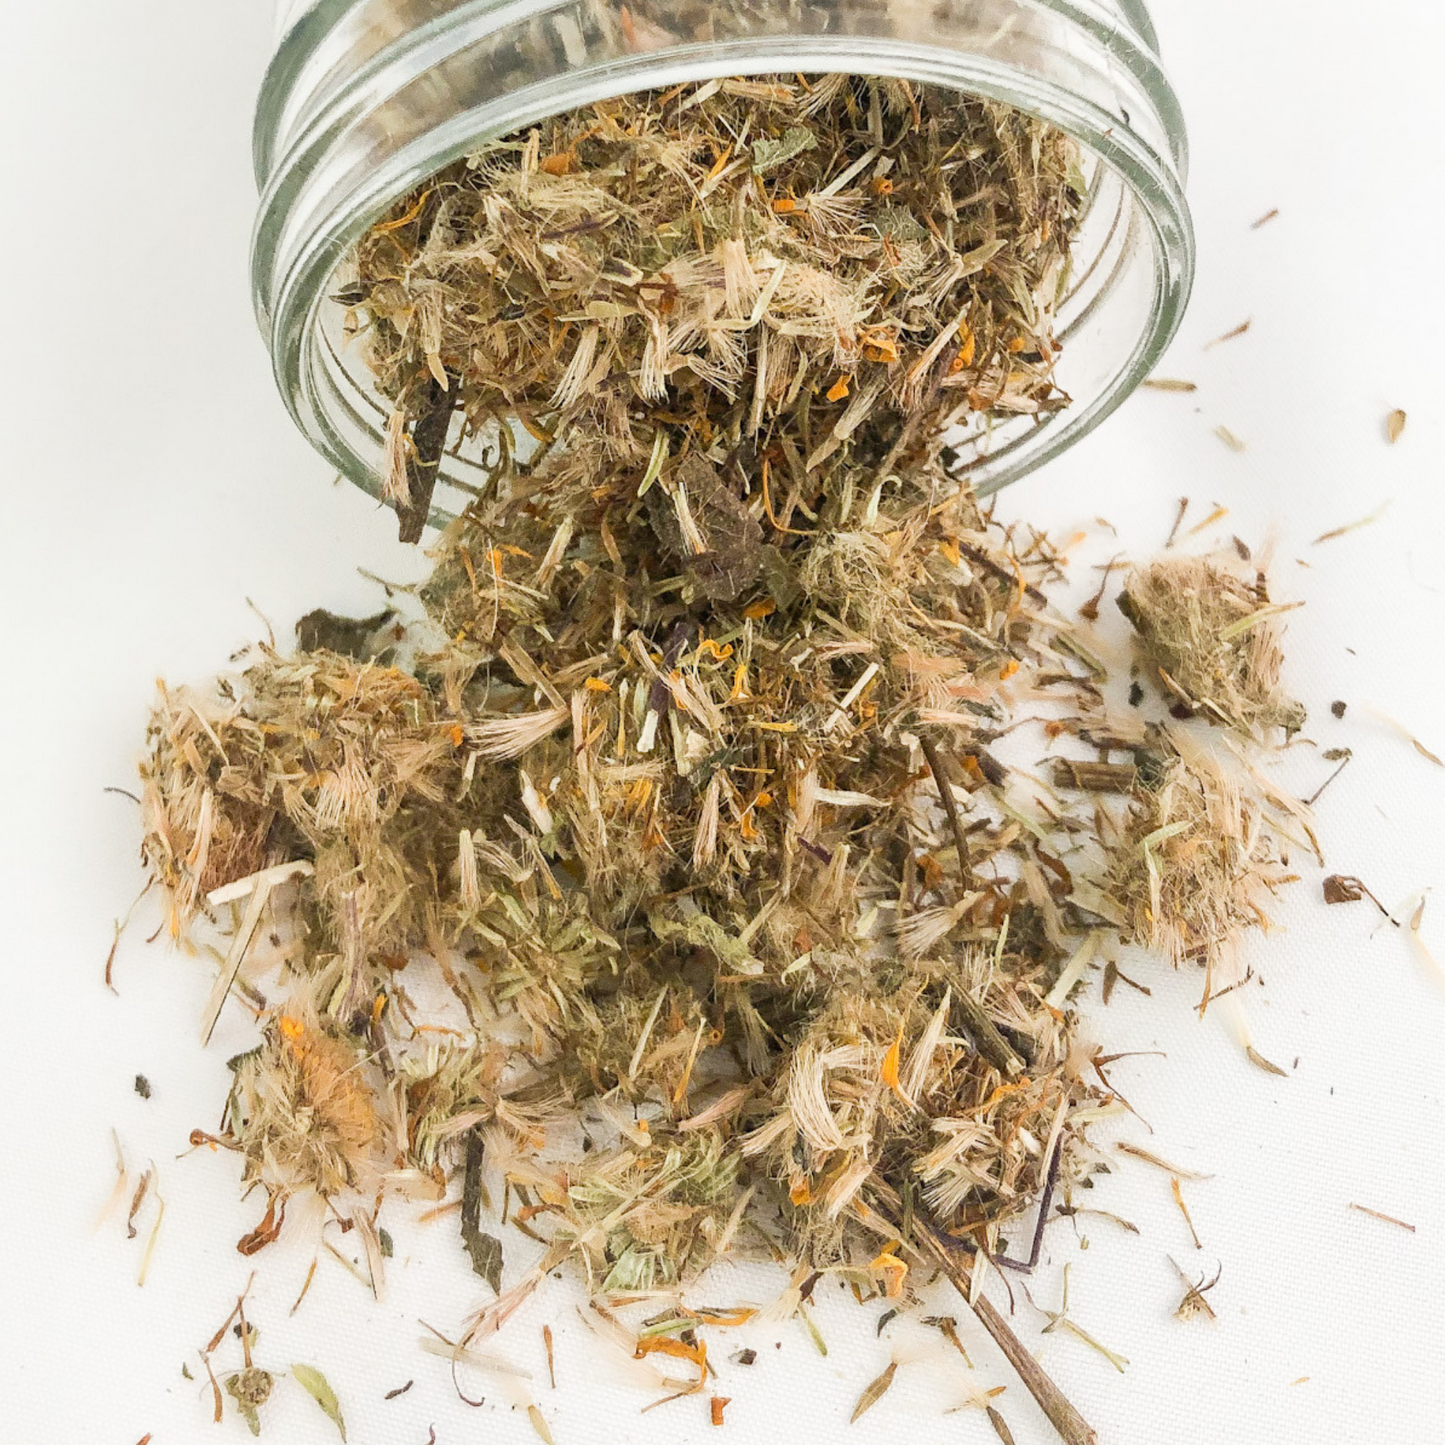 unclose image of dried arnica spilling out a clear glass jar with white background